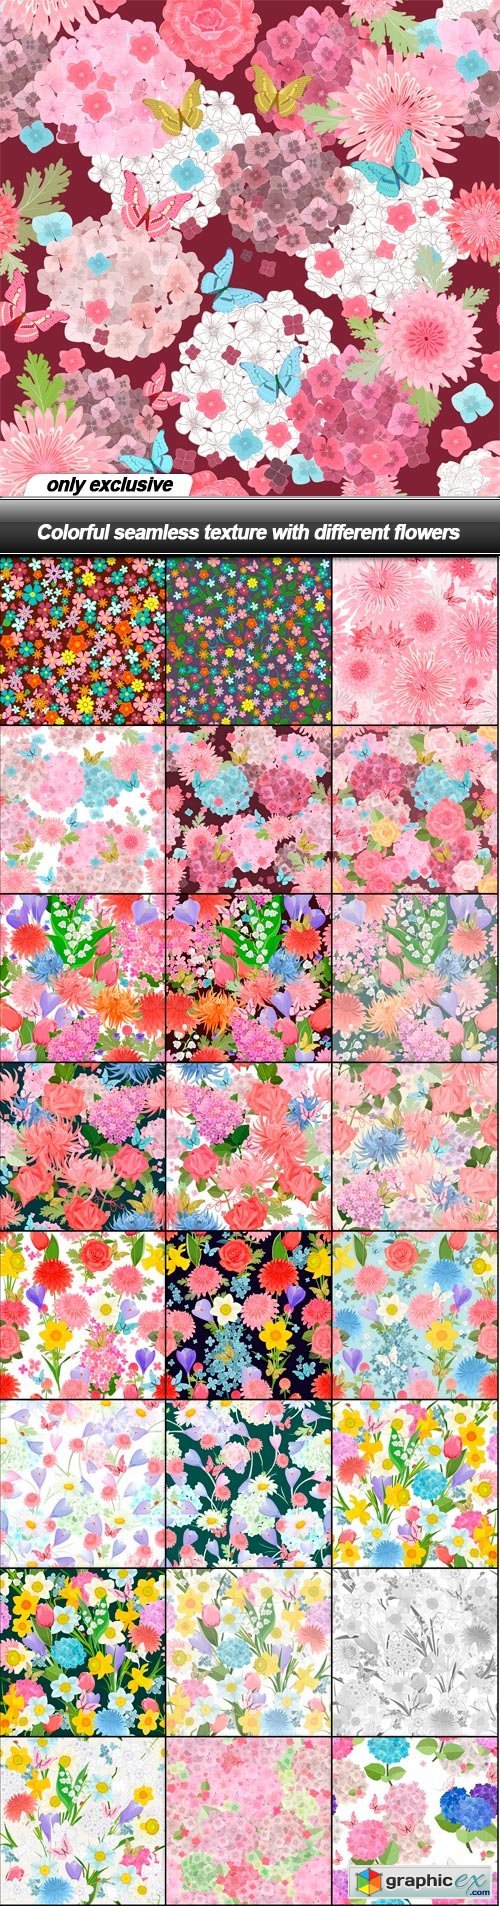 Colorful seamless texture with different flowers - 25 EPS